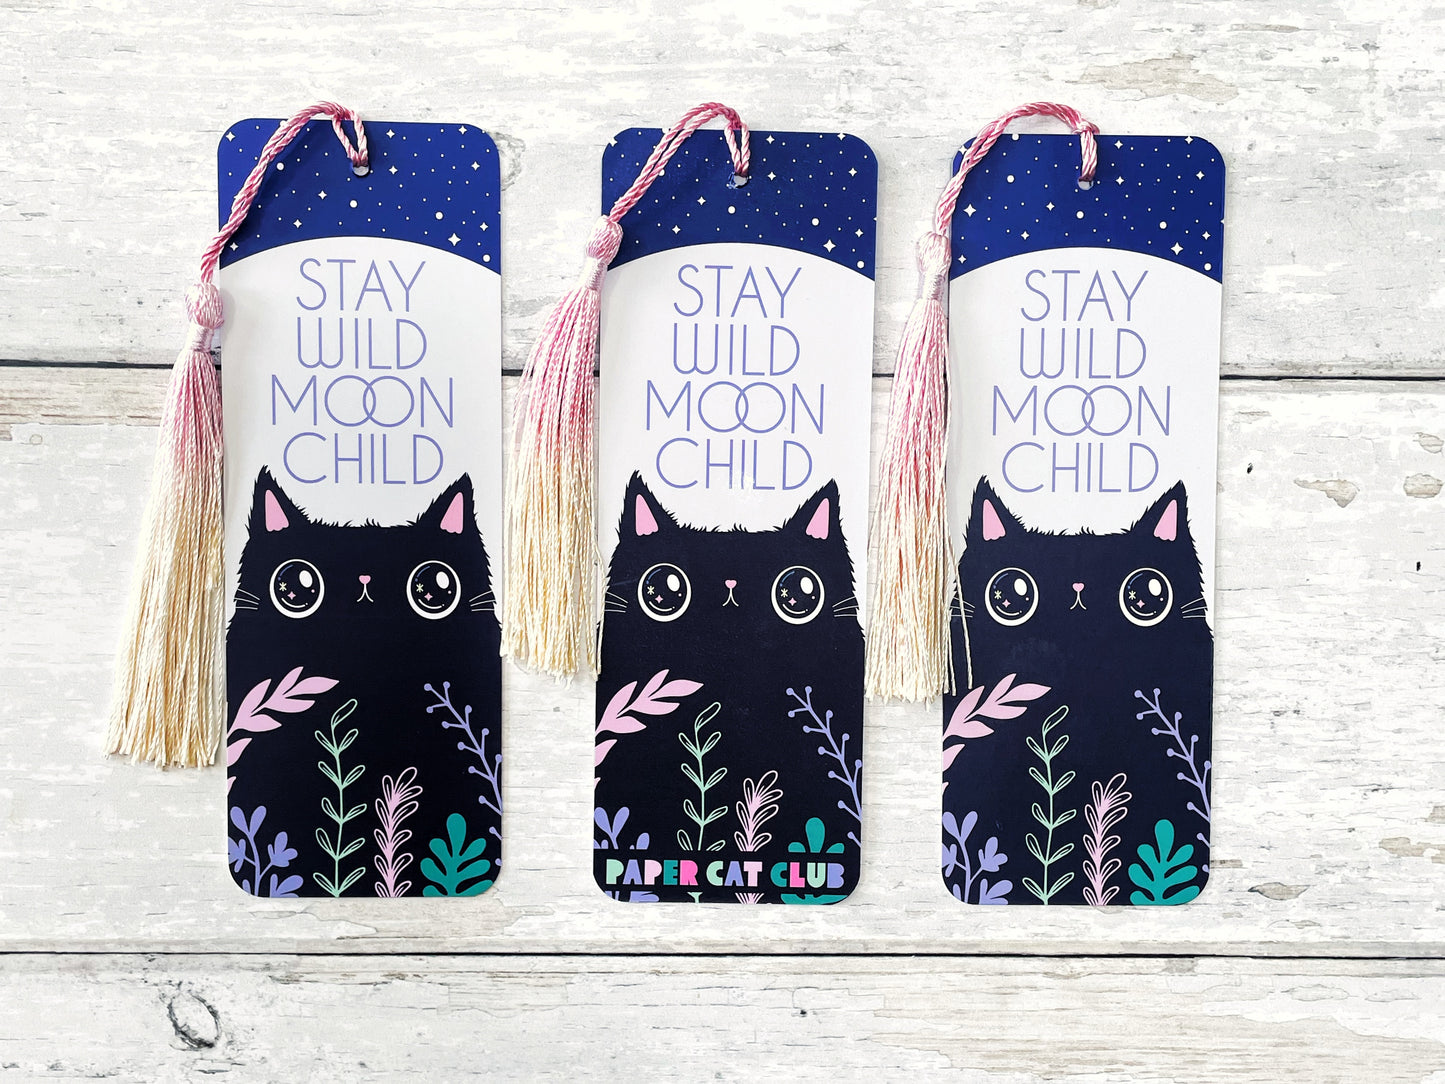 Stay Wild Moon Child bookmark with ombré tassel